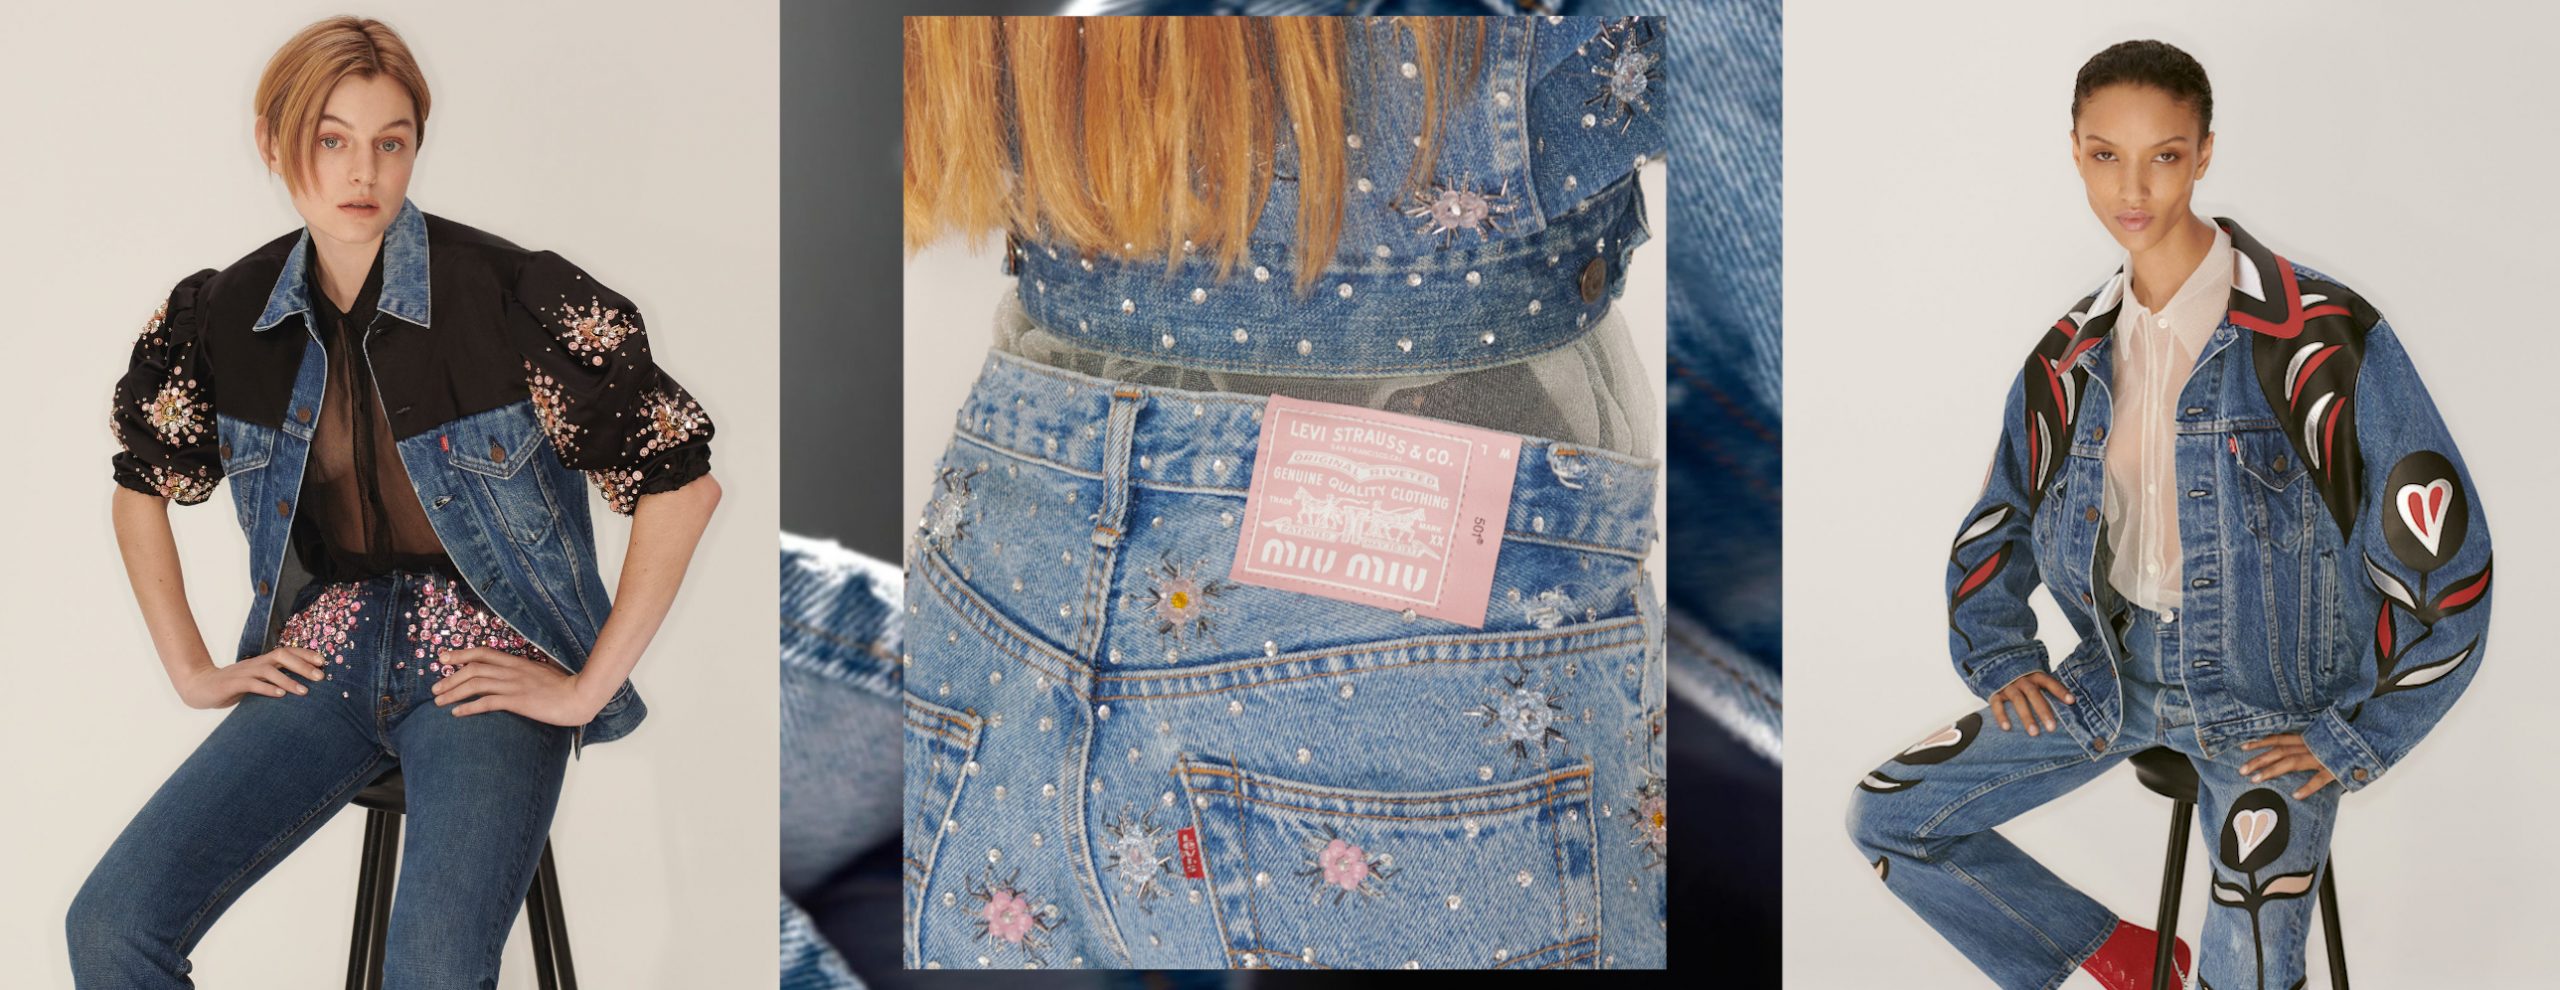 Miu Miu and Levi's Have Teamed Up For An Upcycled Denim Collection